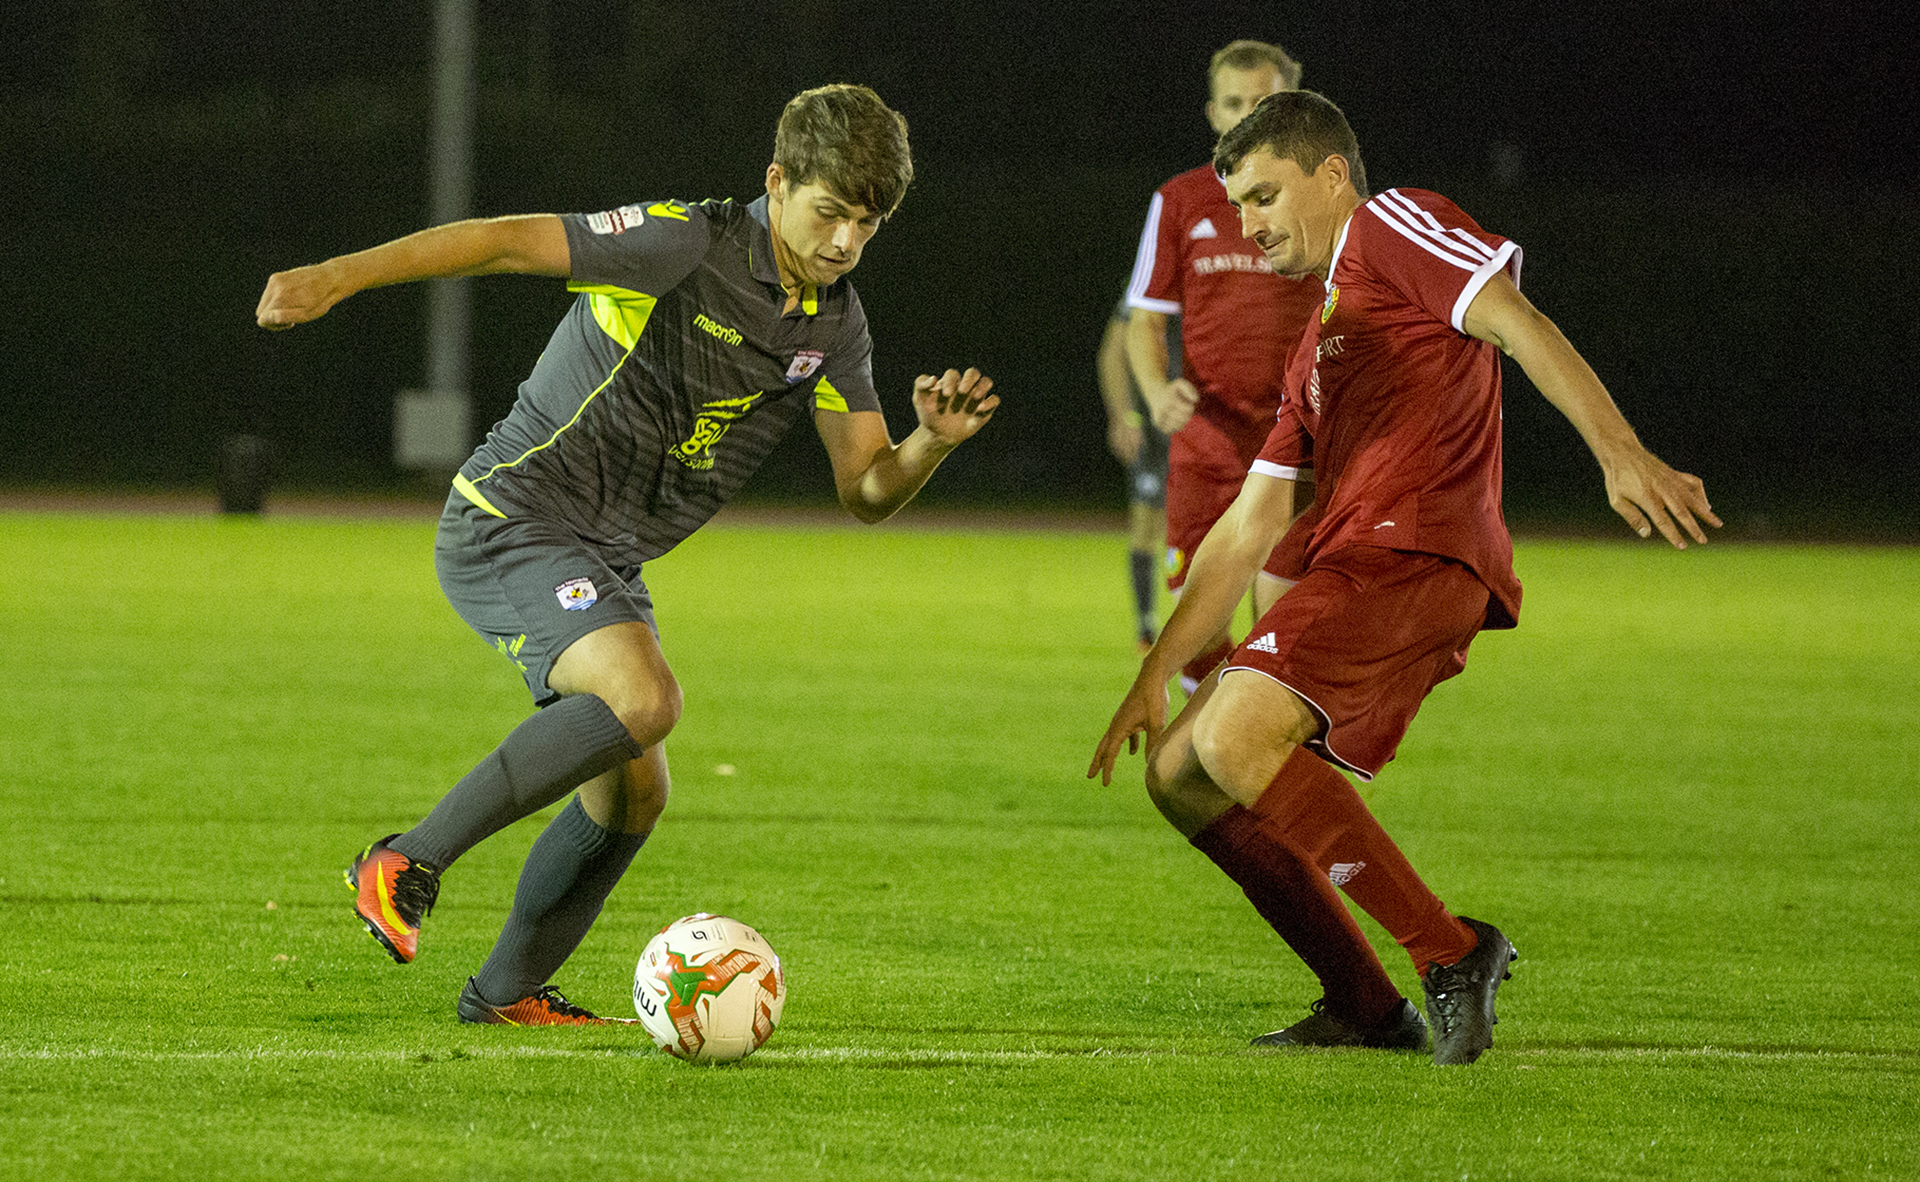 16-year-old Conor Harwood made his first team debut for The Nomads - © NCM Media